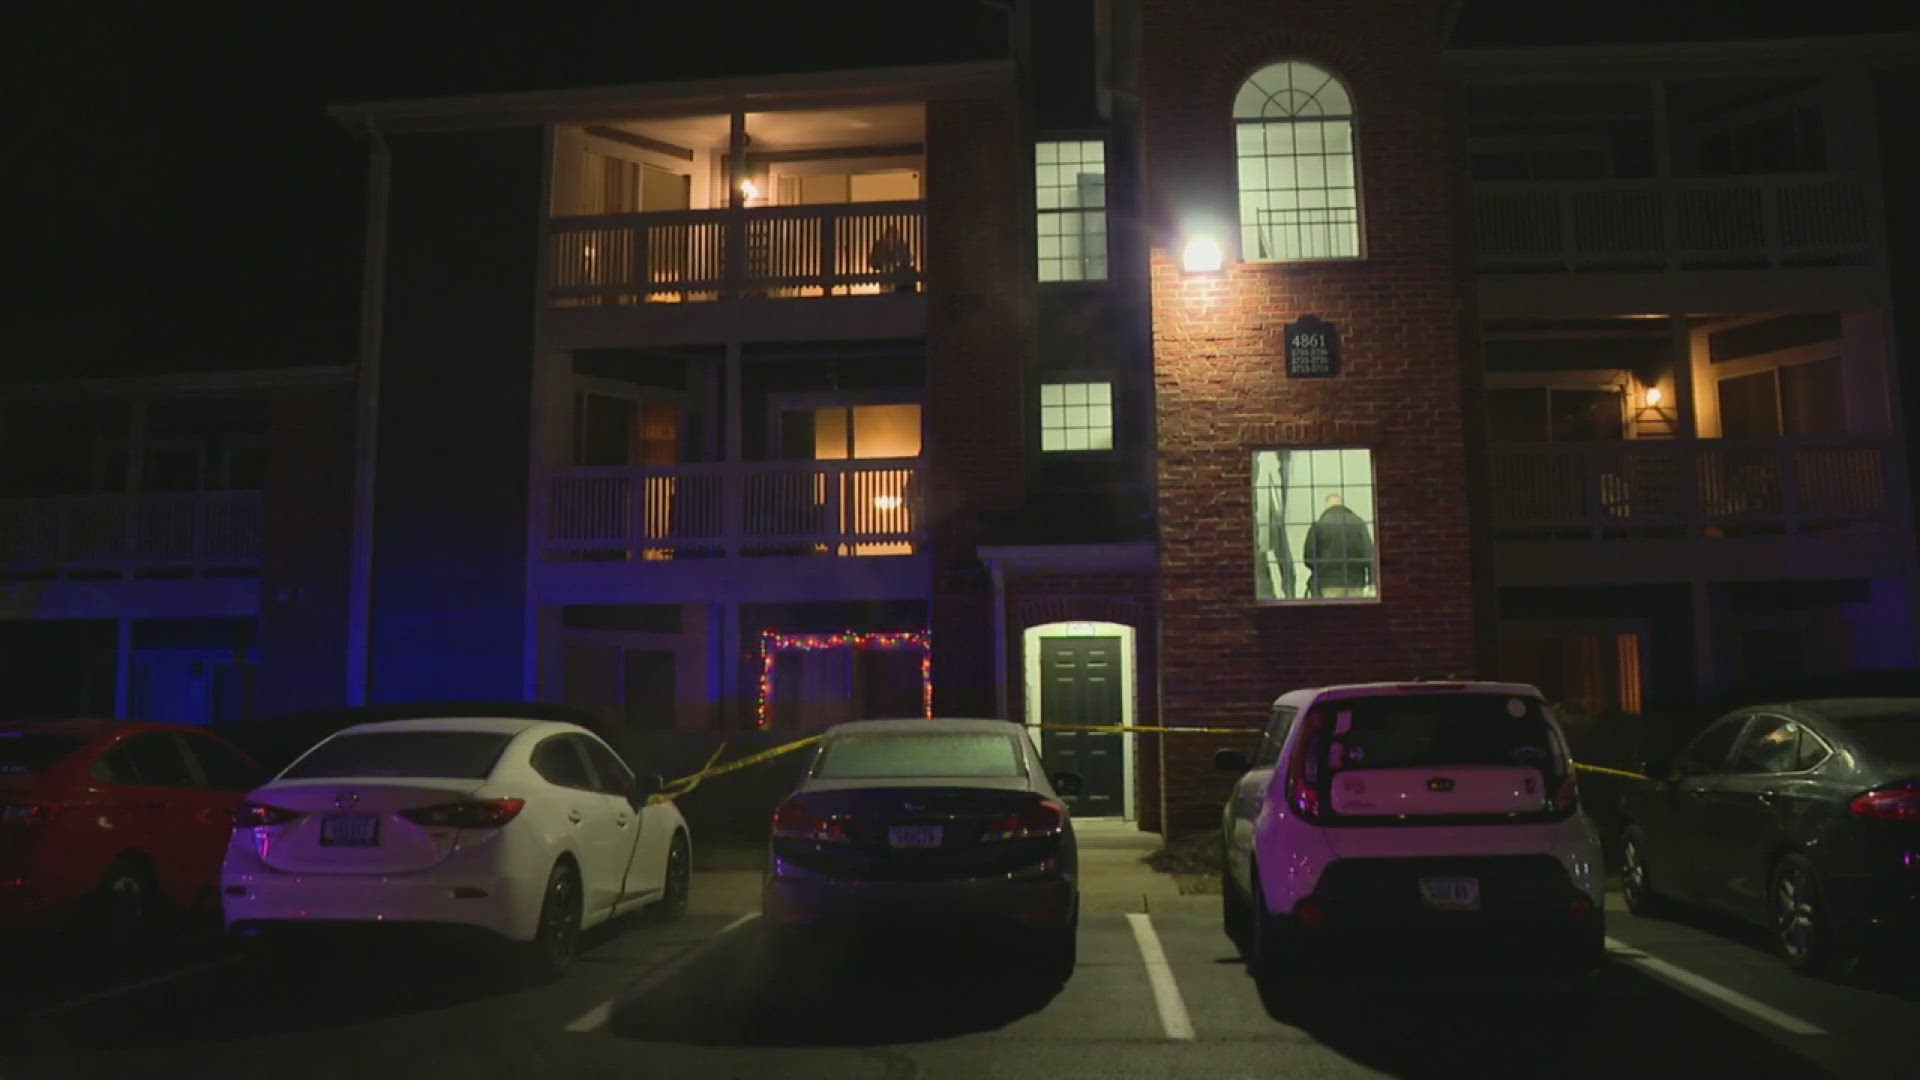 An Indianapolis woman tells 13News she shot and killed her boyfriend while he was attacking her inside an apartment Thursday night.